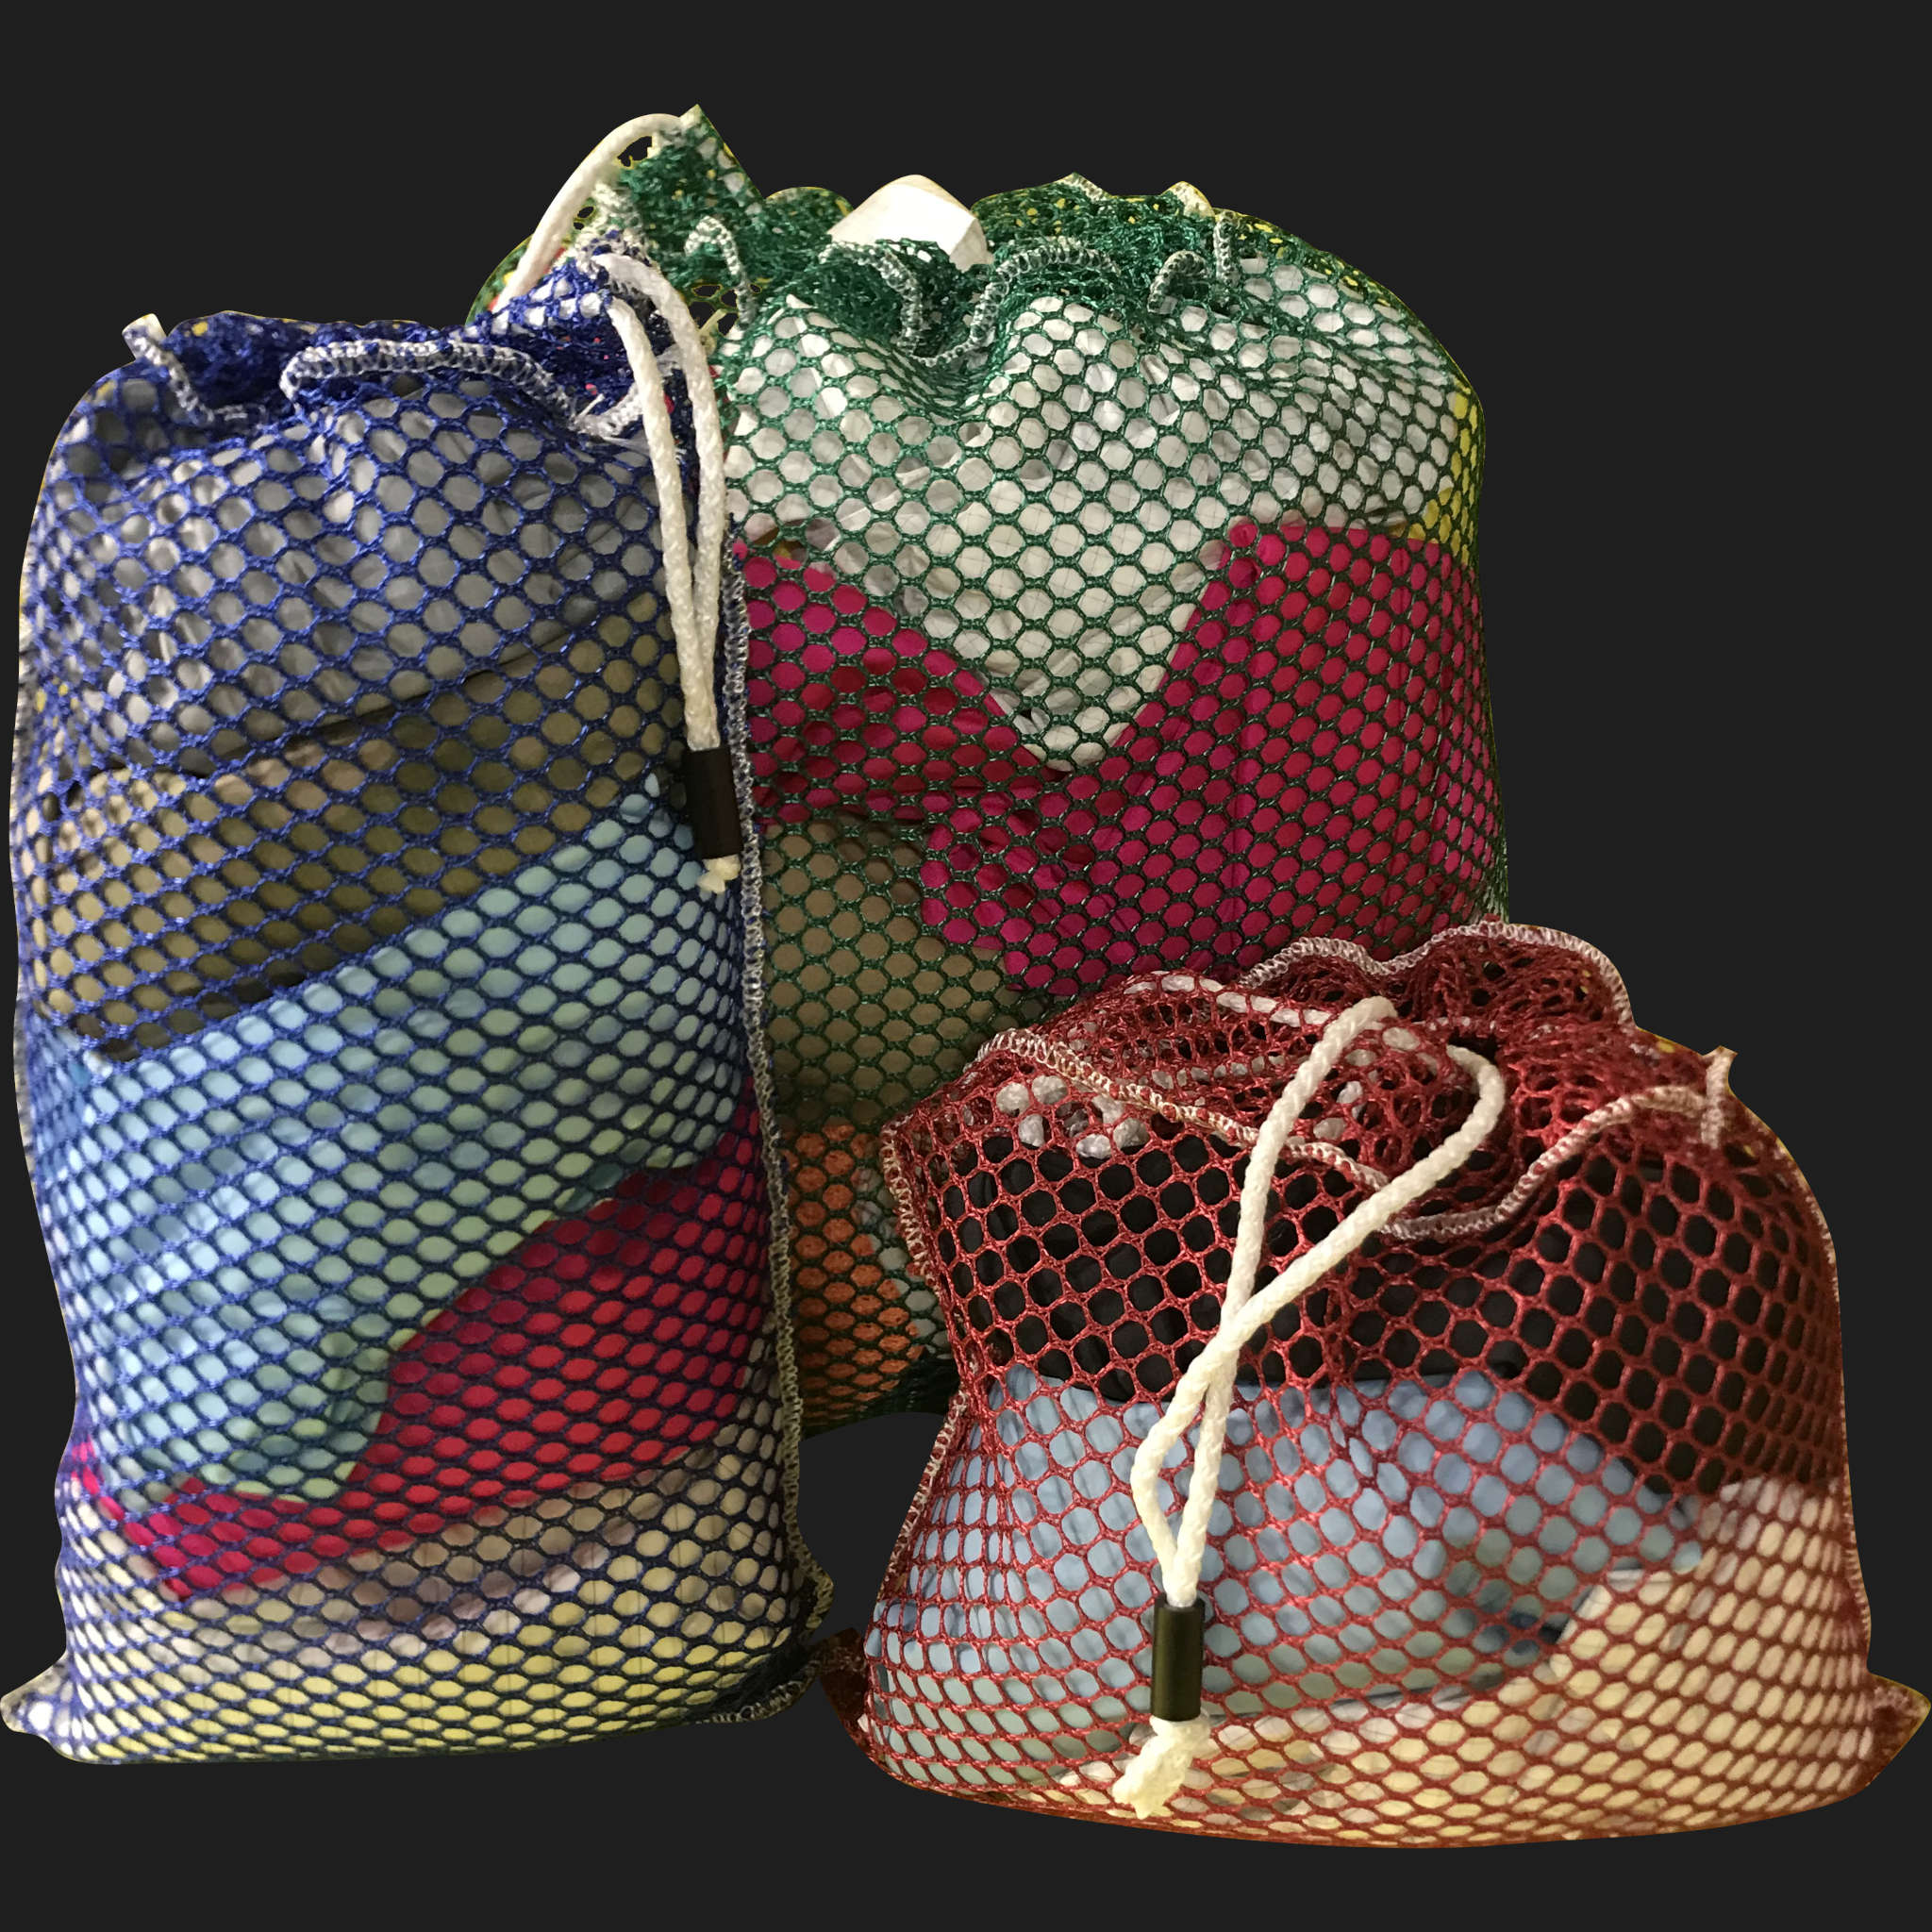 24" x 42" Customized Mesh-Net-Laundry Bags Heavy Duty with Cord and barrellock closure